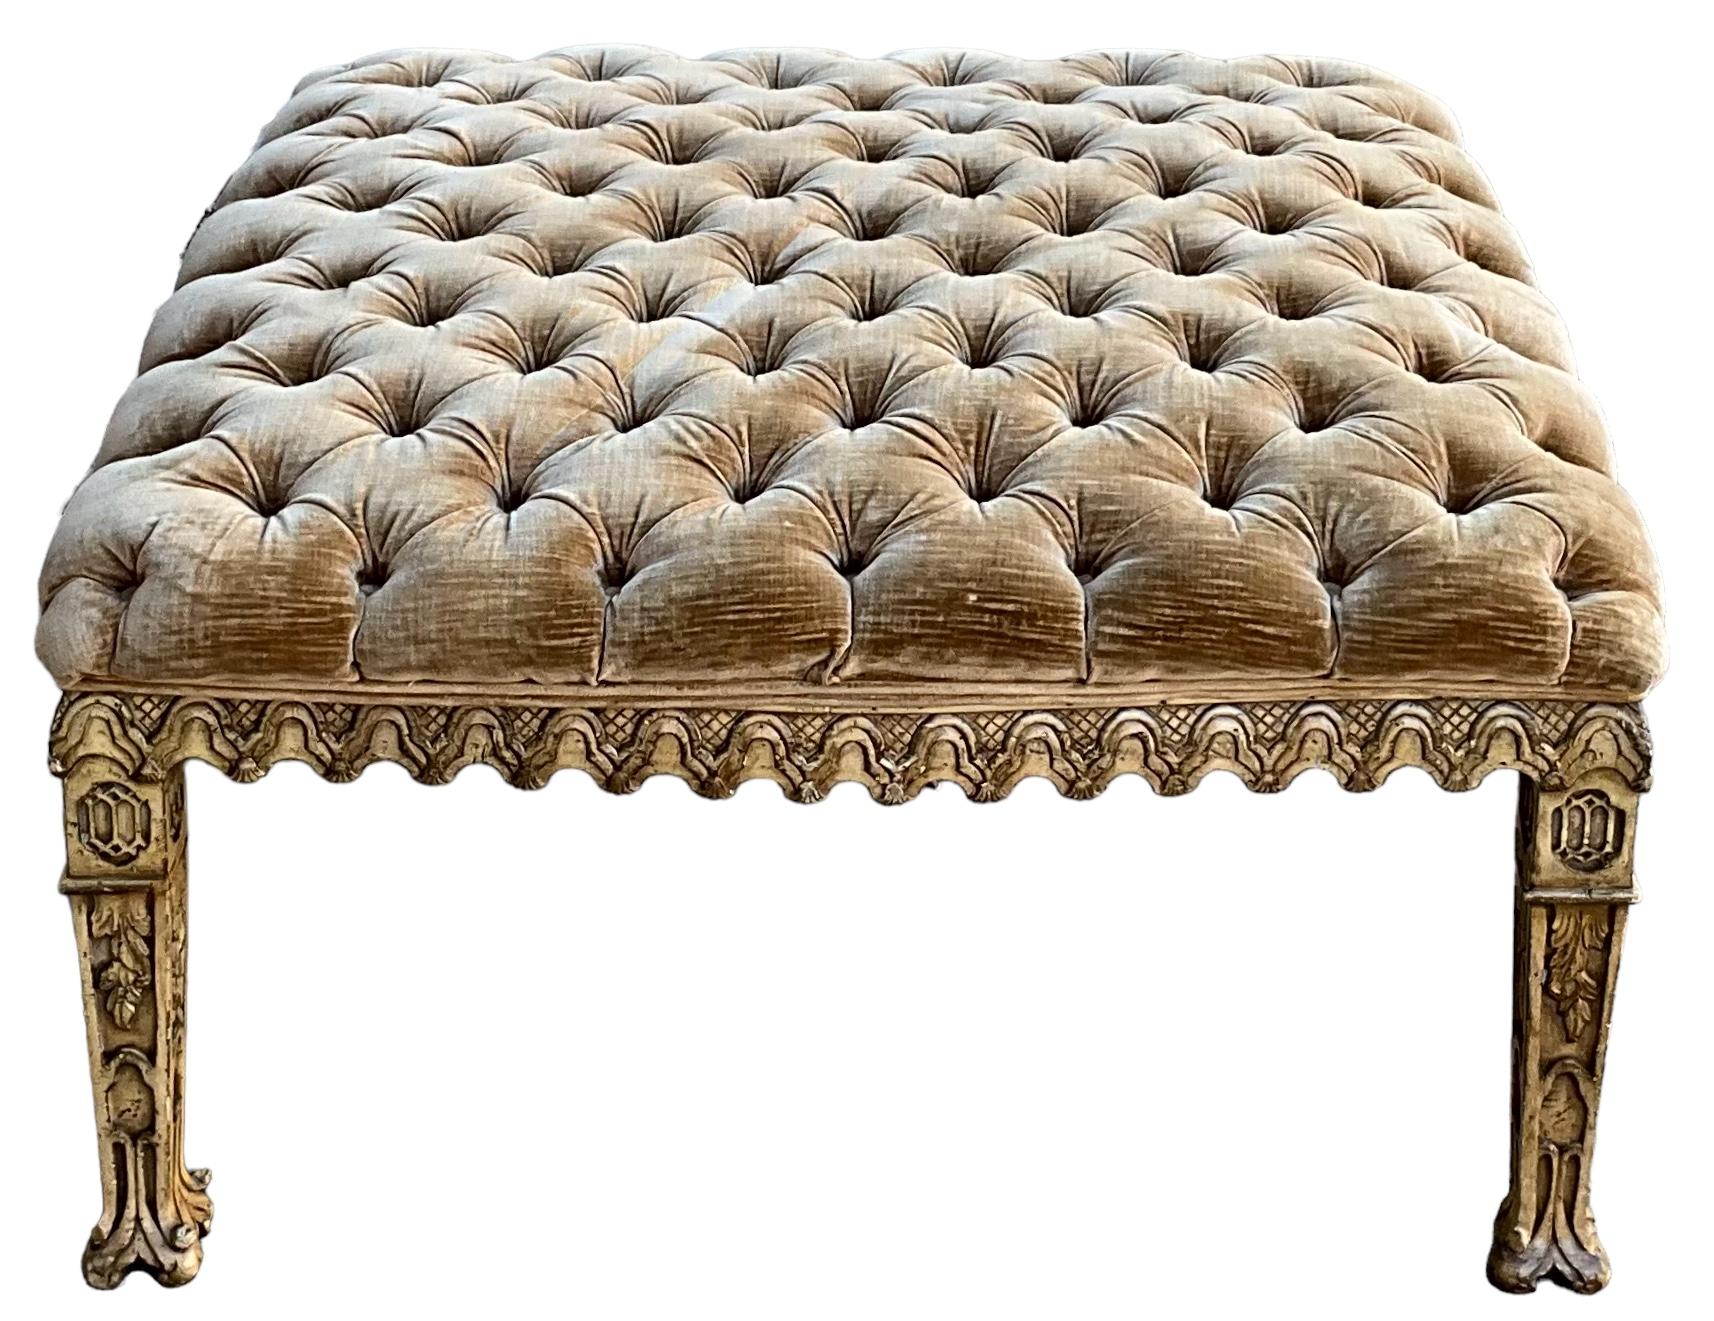 Rococo 1970s Venetian Style Heavily Carved Tufted Velvet Ottoman / Coffee Table For Sale